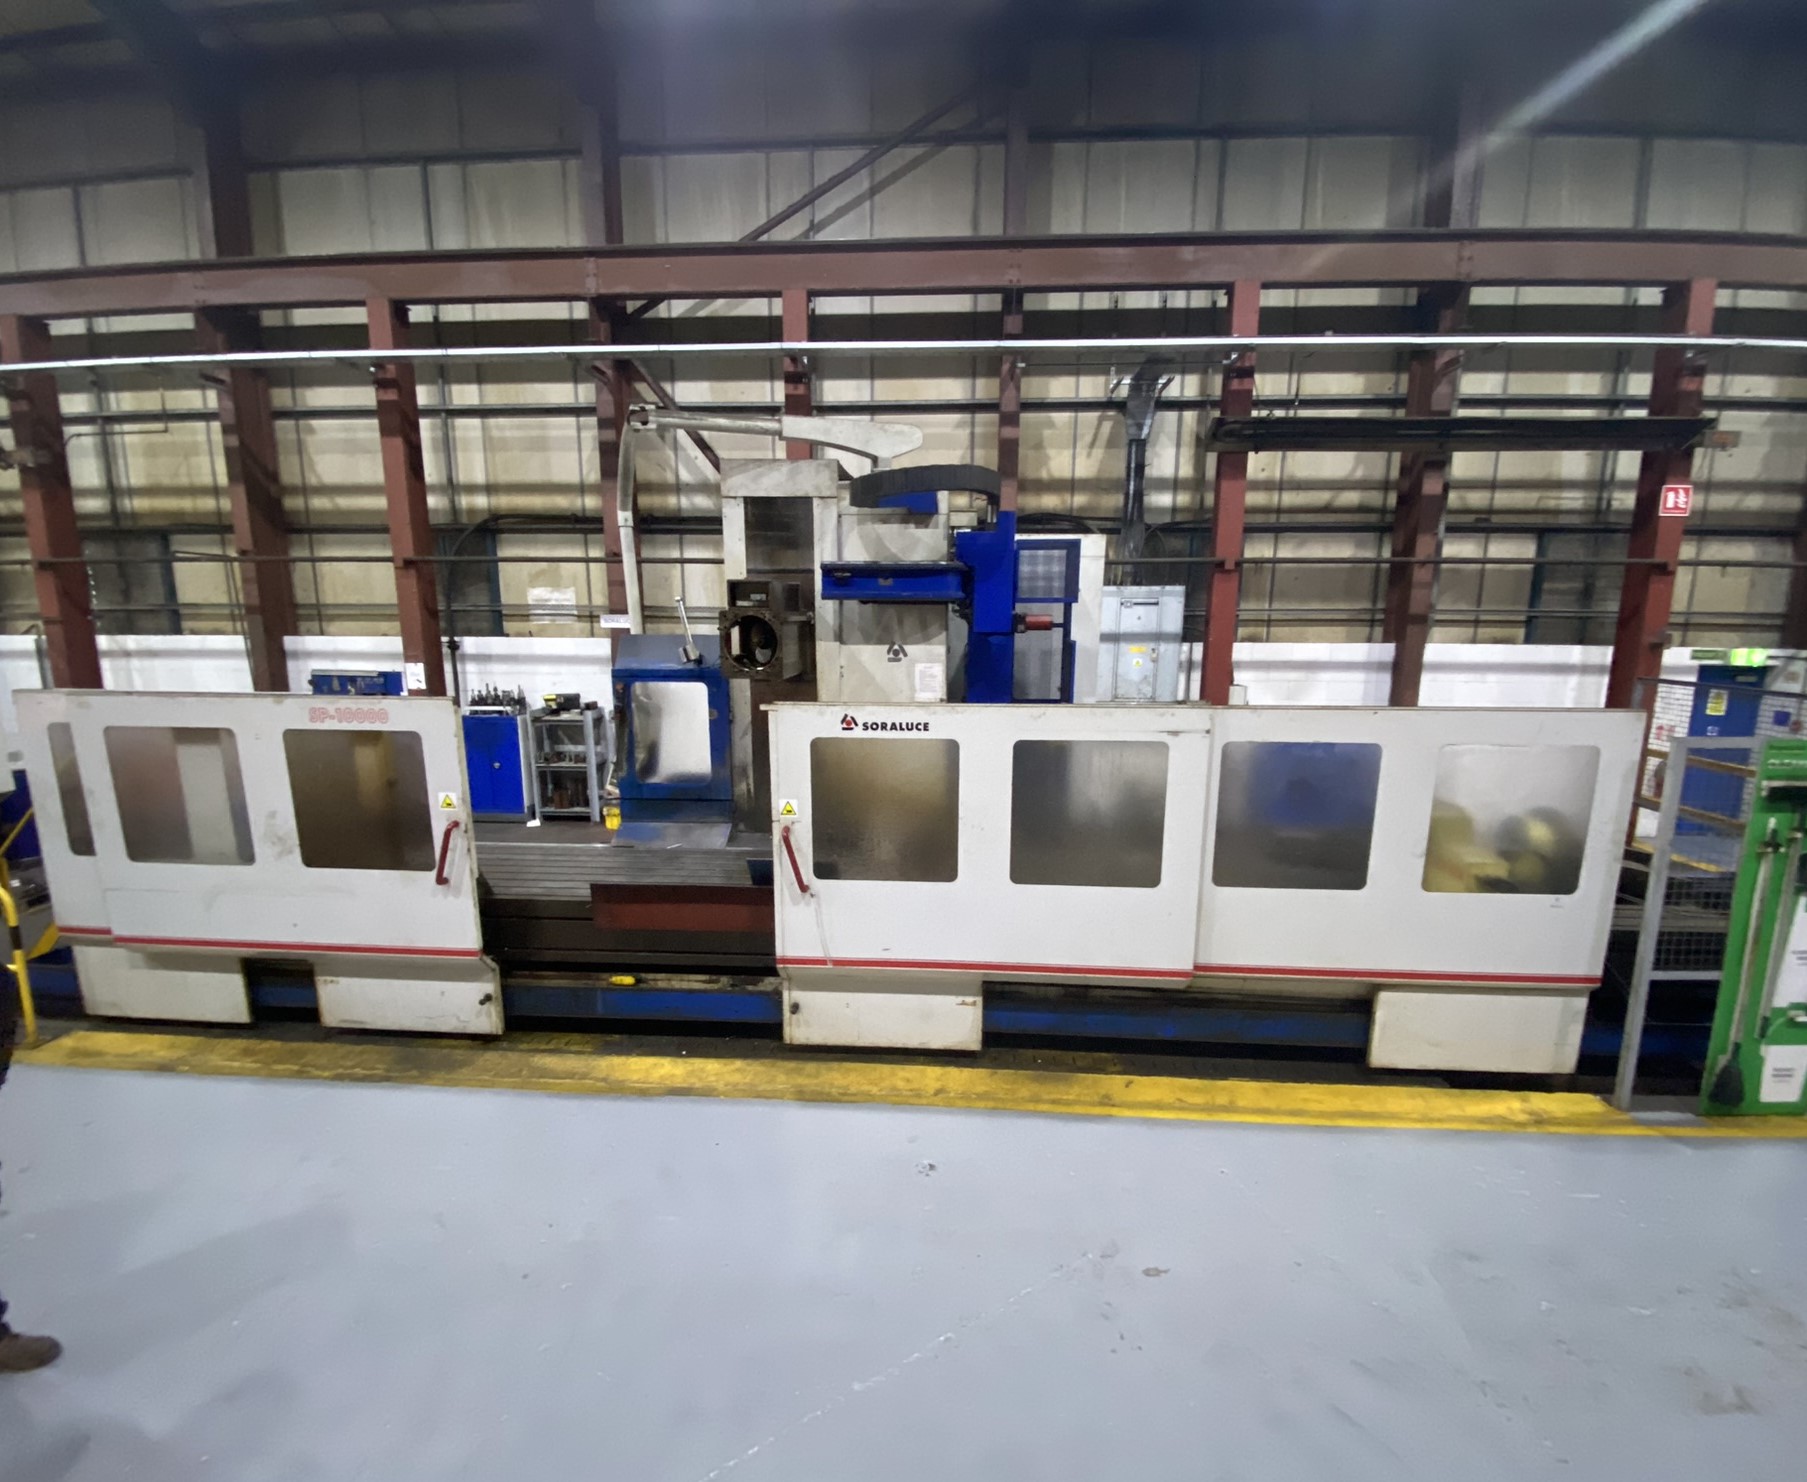 USED SORALUCE SP1000 Travelling Column Table Type Milling Machine – TWW Cat 7974